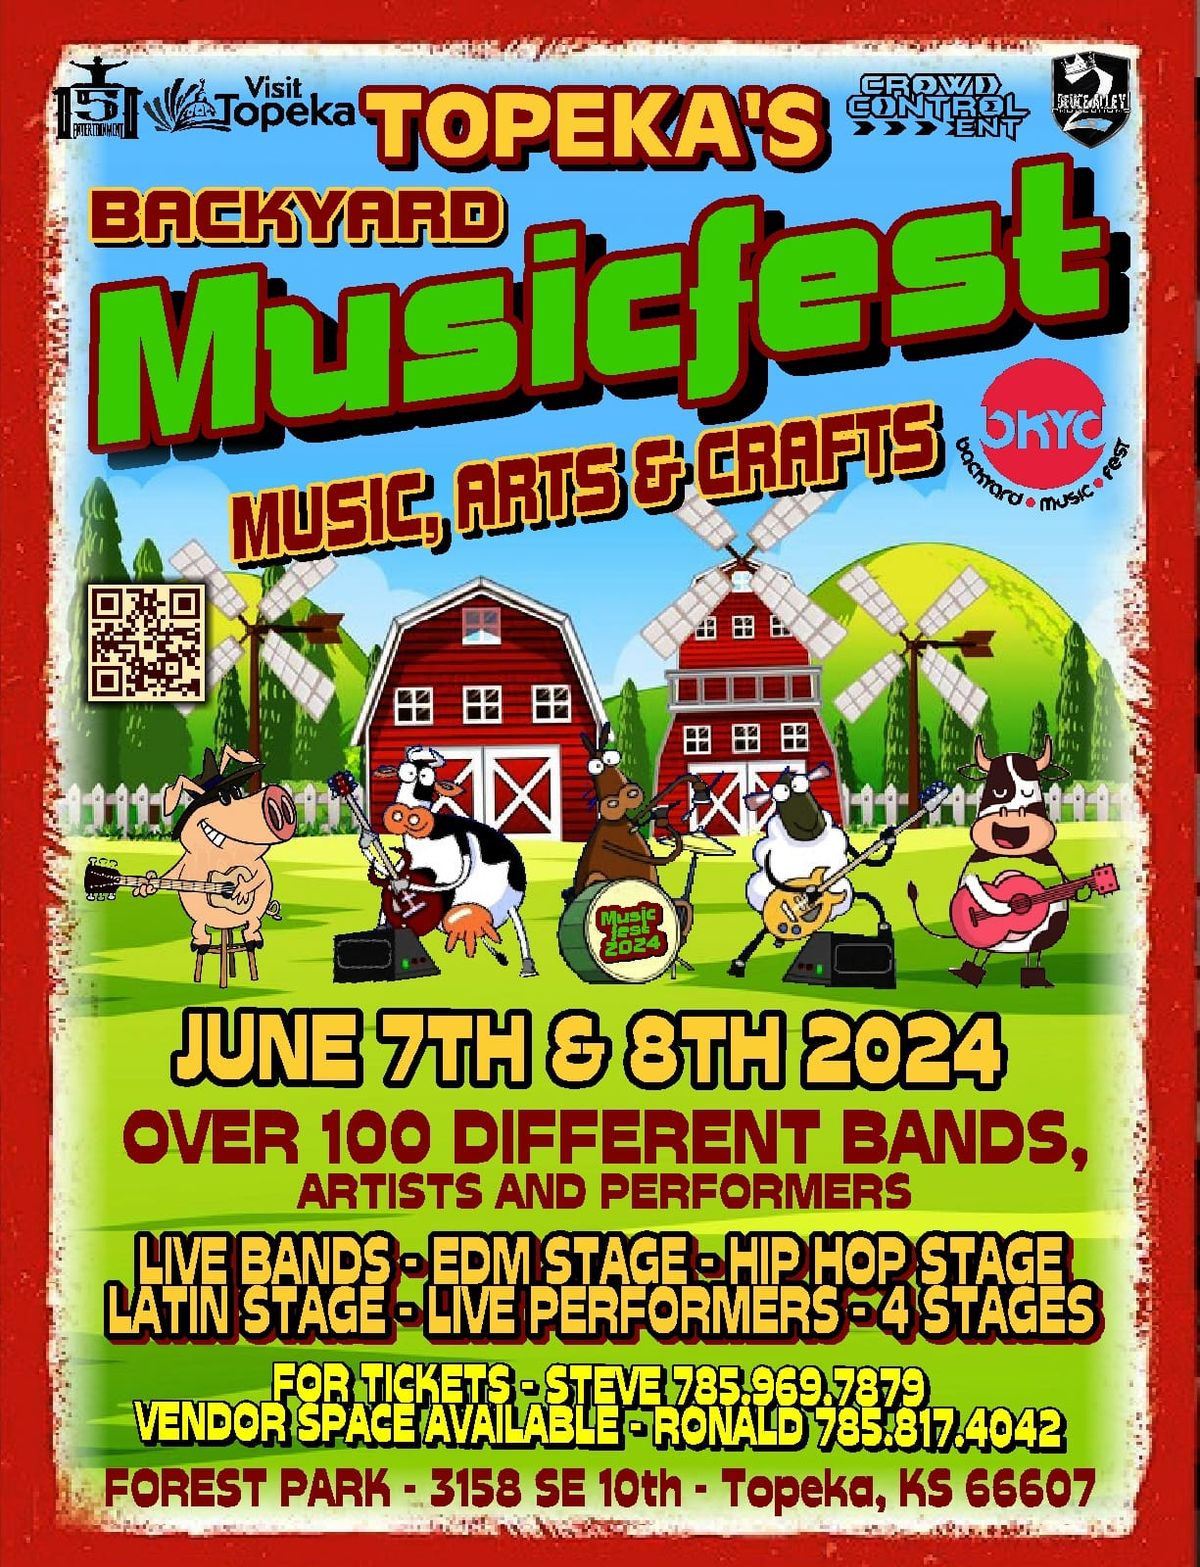 TOPEKA'S BACKYARD MUSIC FEST 2024 @ FOREST PARK (June 7th & 8th)